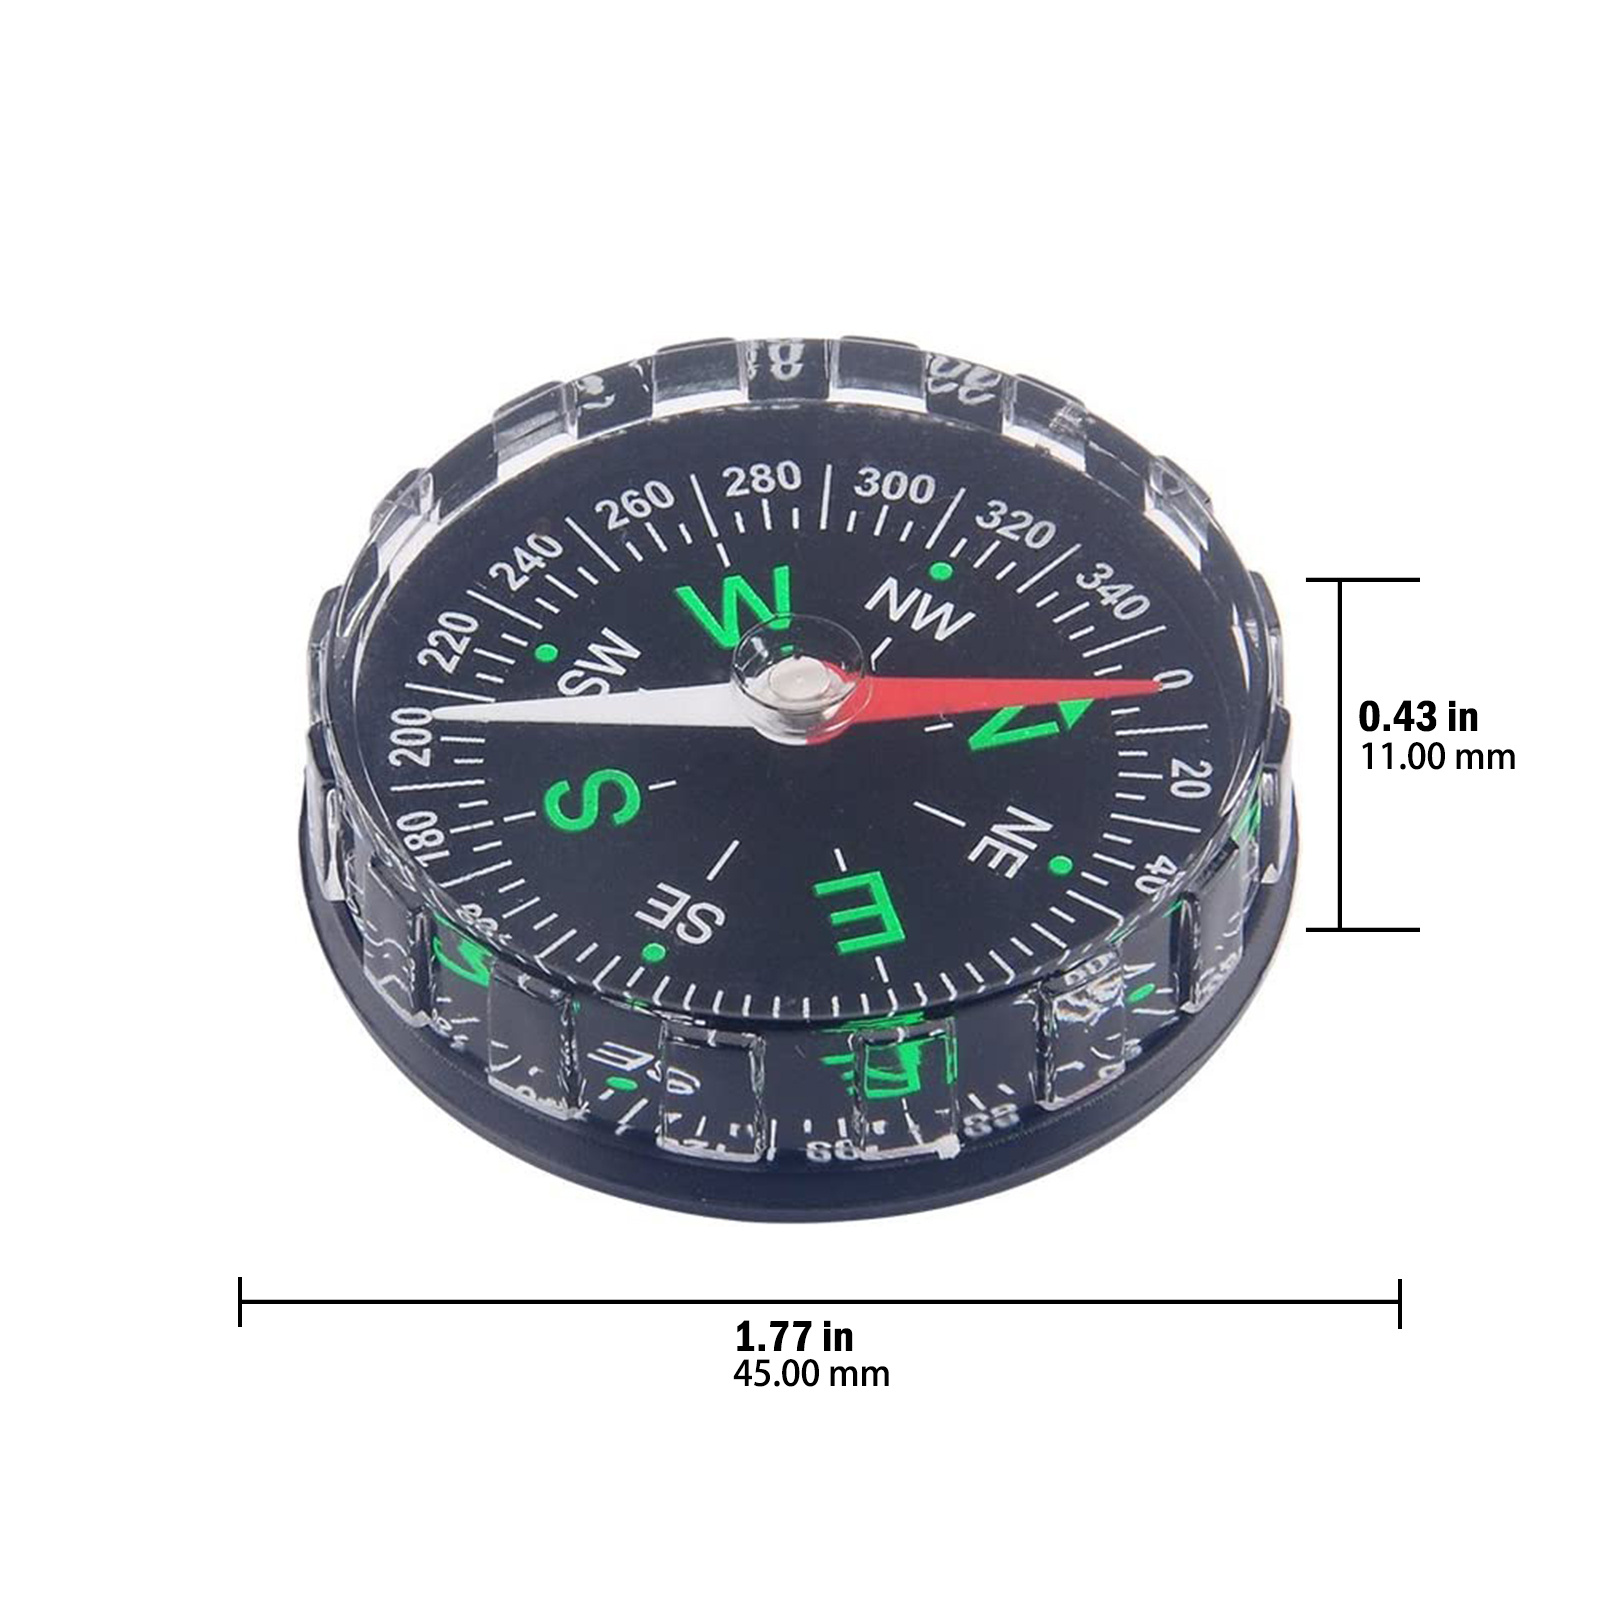 XINQIUS POCKET COMPASS HIKING SCOUTS CAMPING WALKING SURVIVAL AID GUIDES